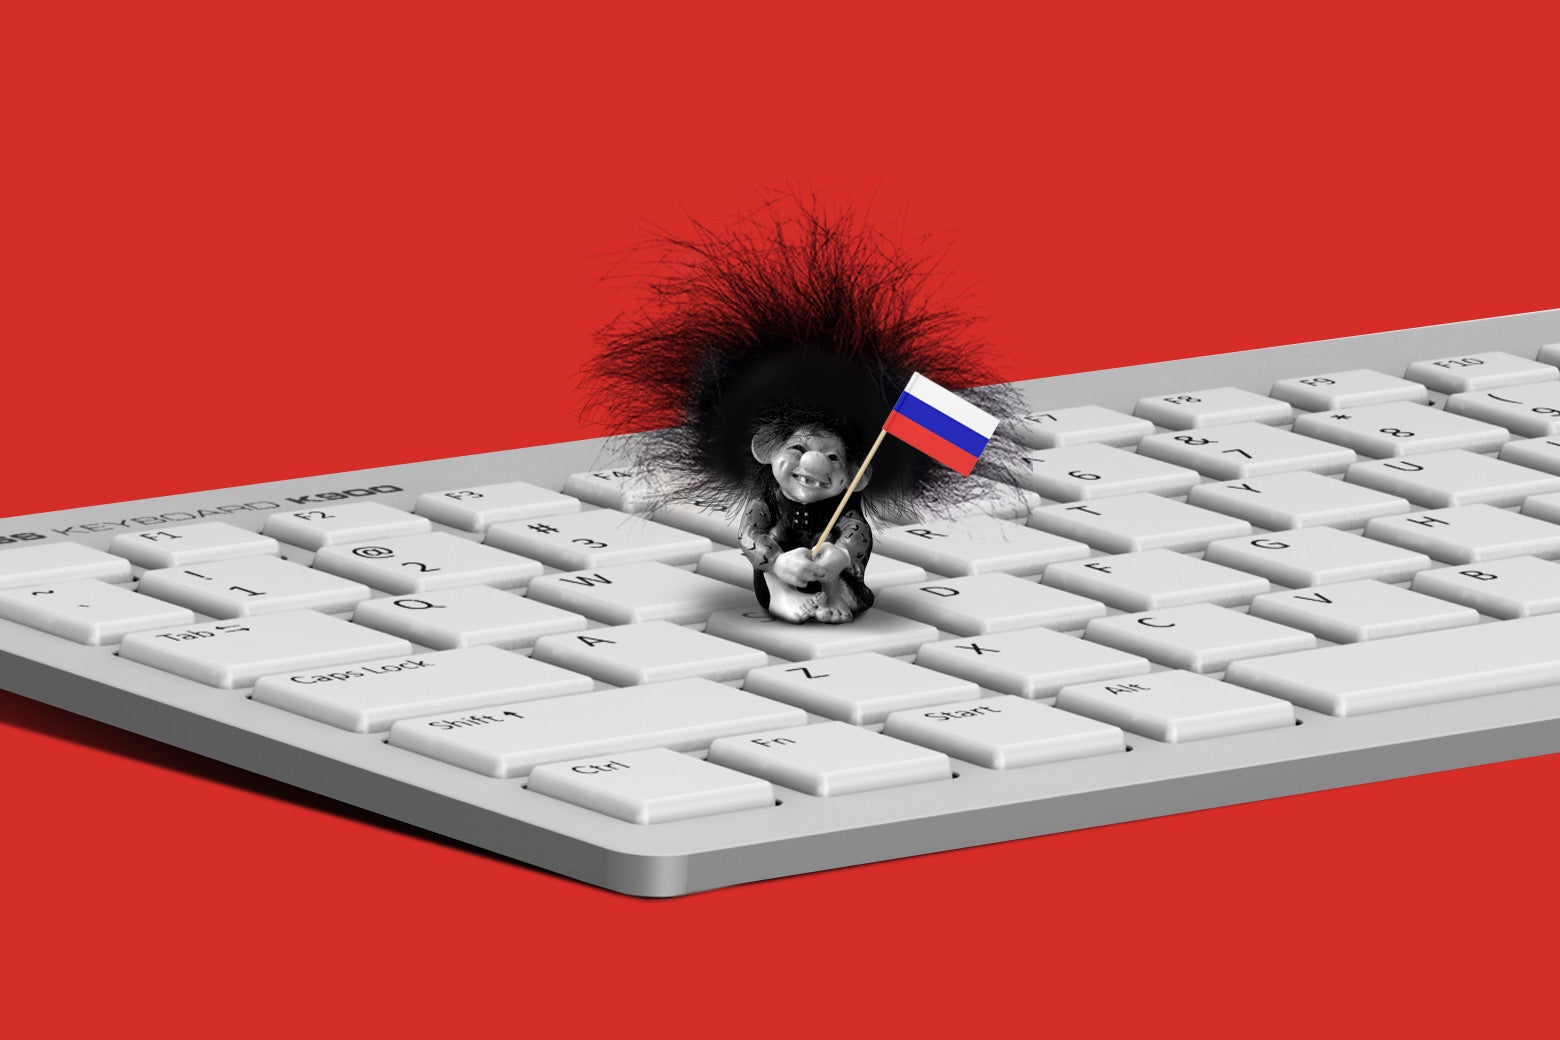 A Troll doll holding a Russian flag while standing on a keyboard.